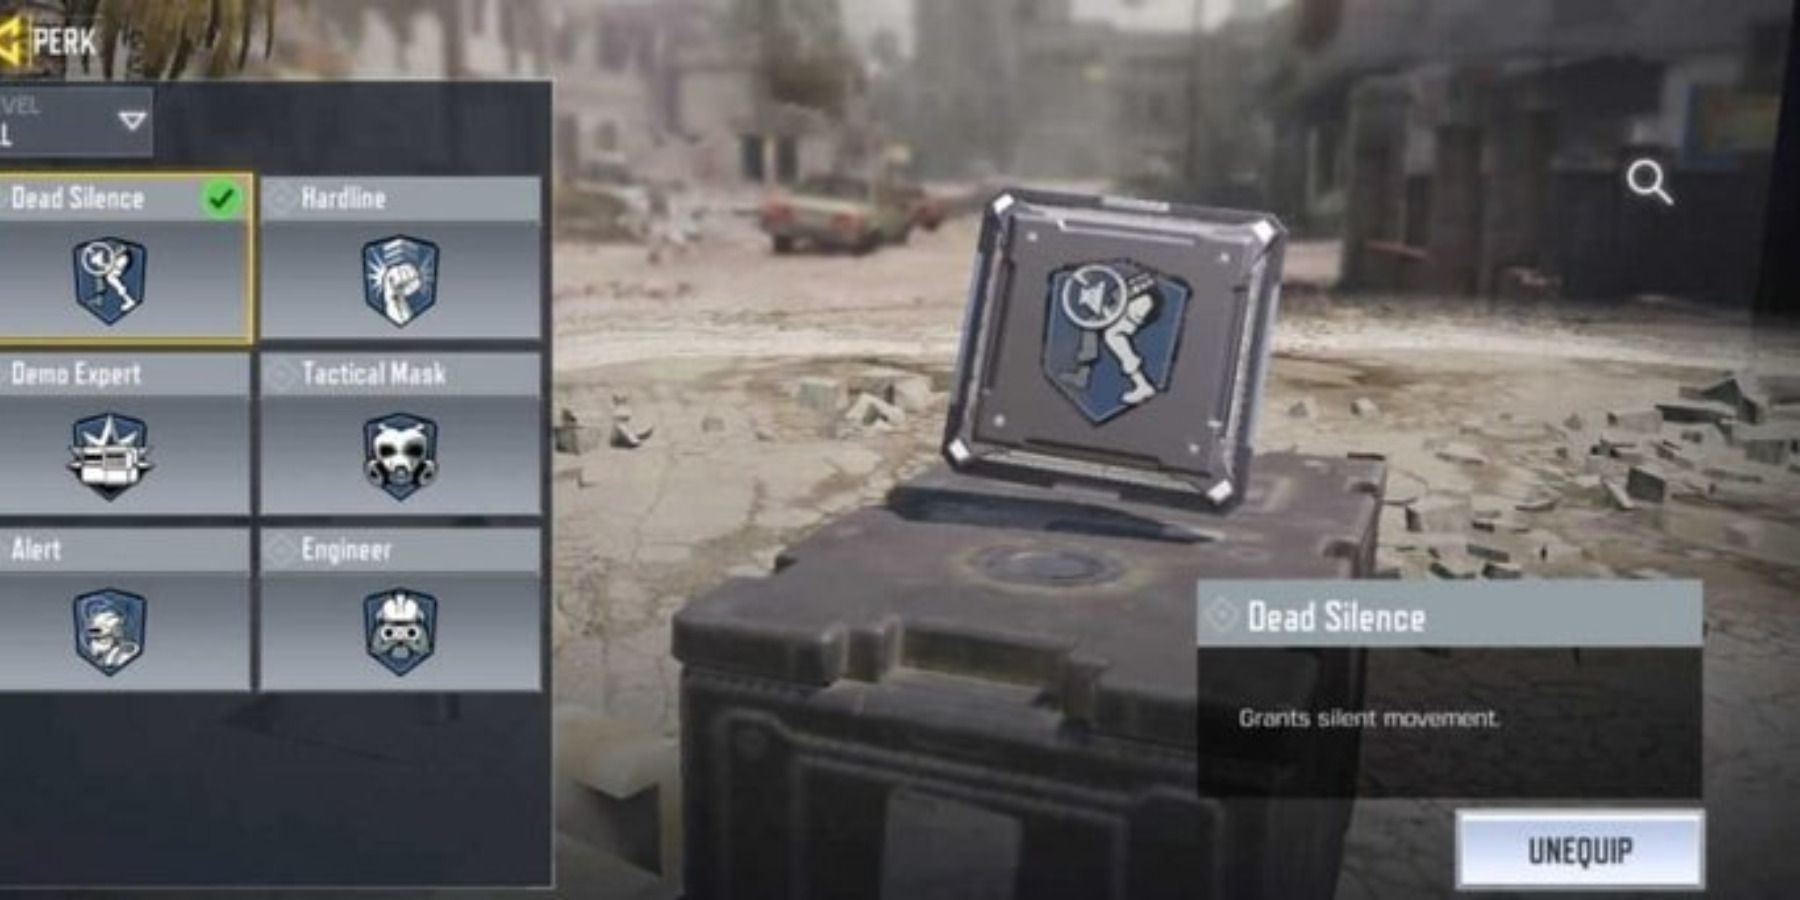 Dead Silence Perk from Call of Duty Mobile.